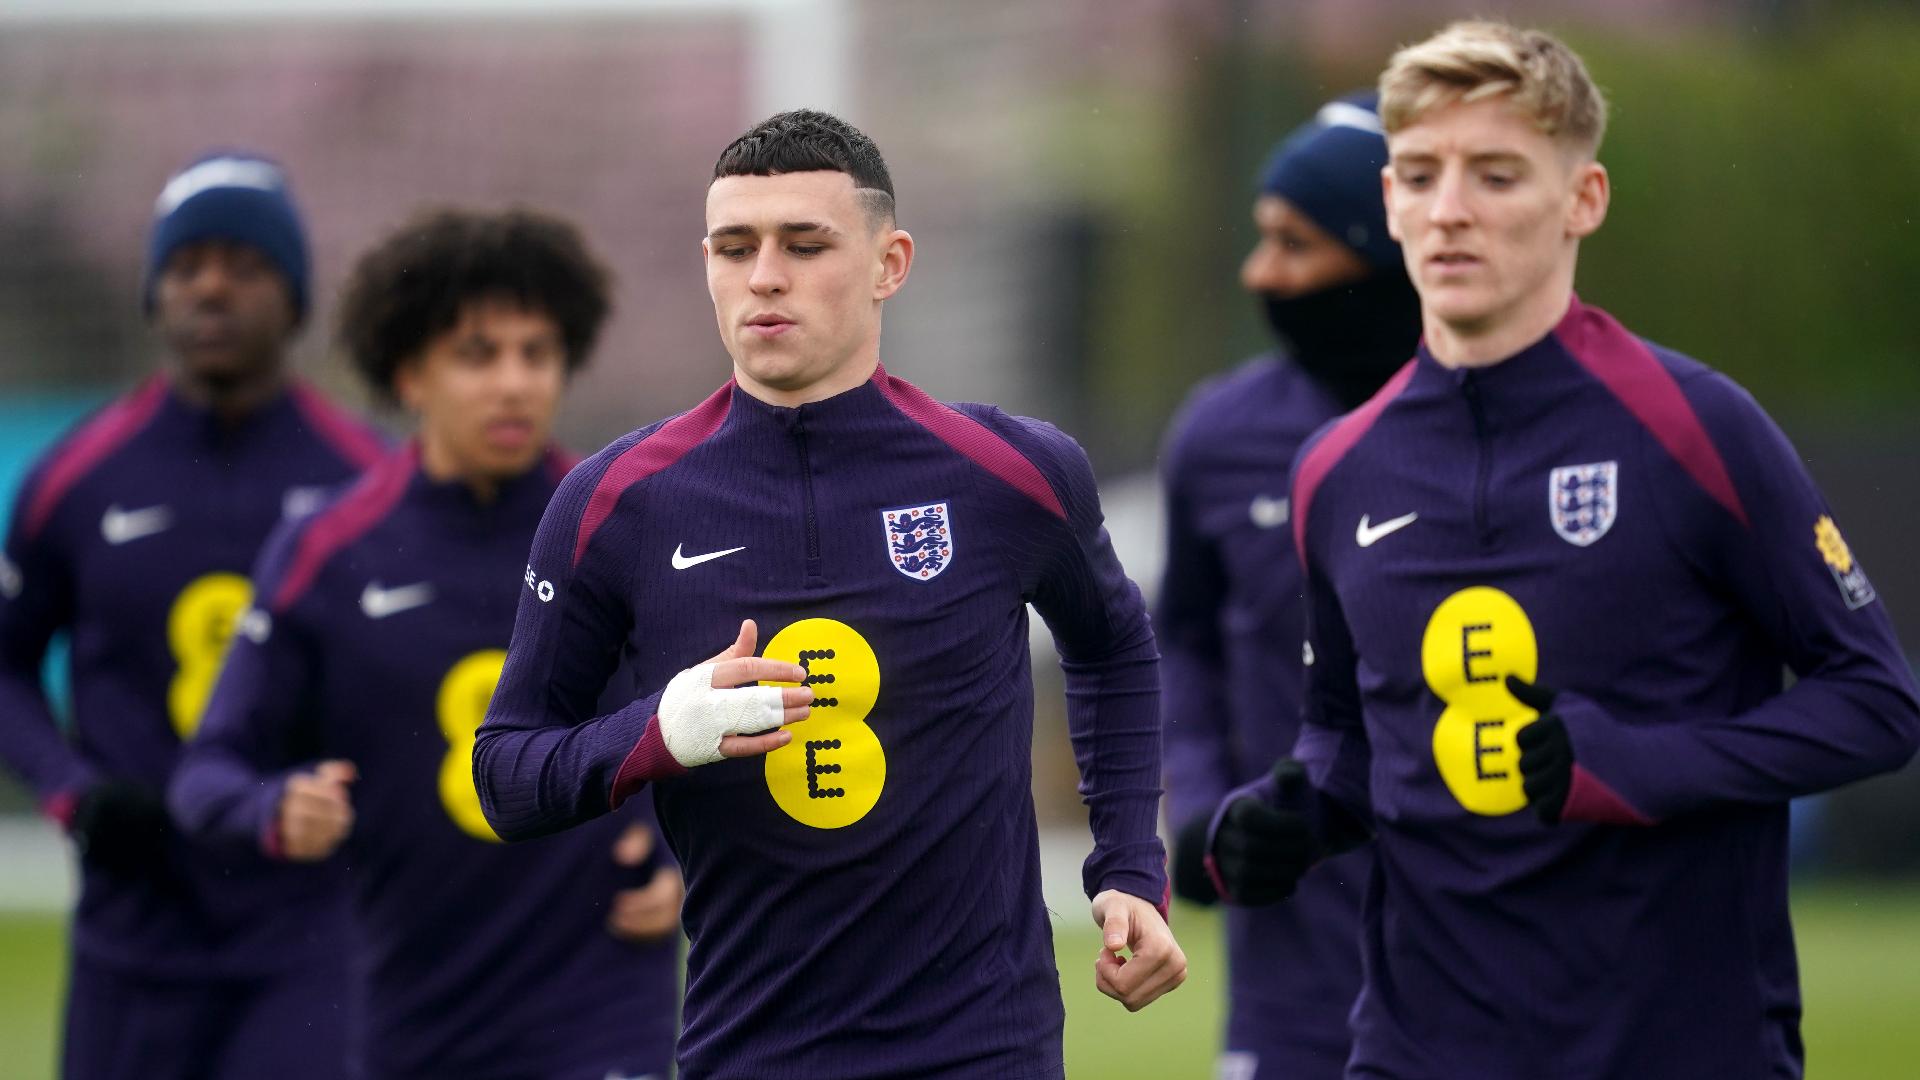 5 key talking points ahead of England’s friendly clash with Belgium